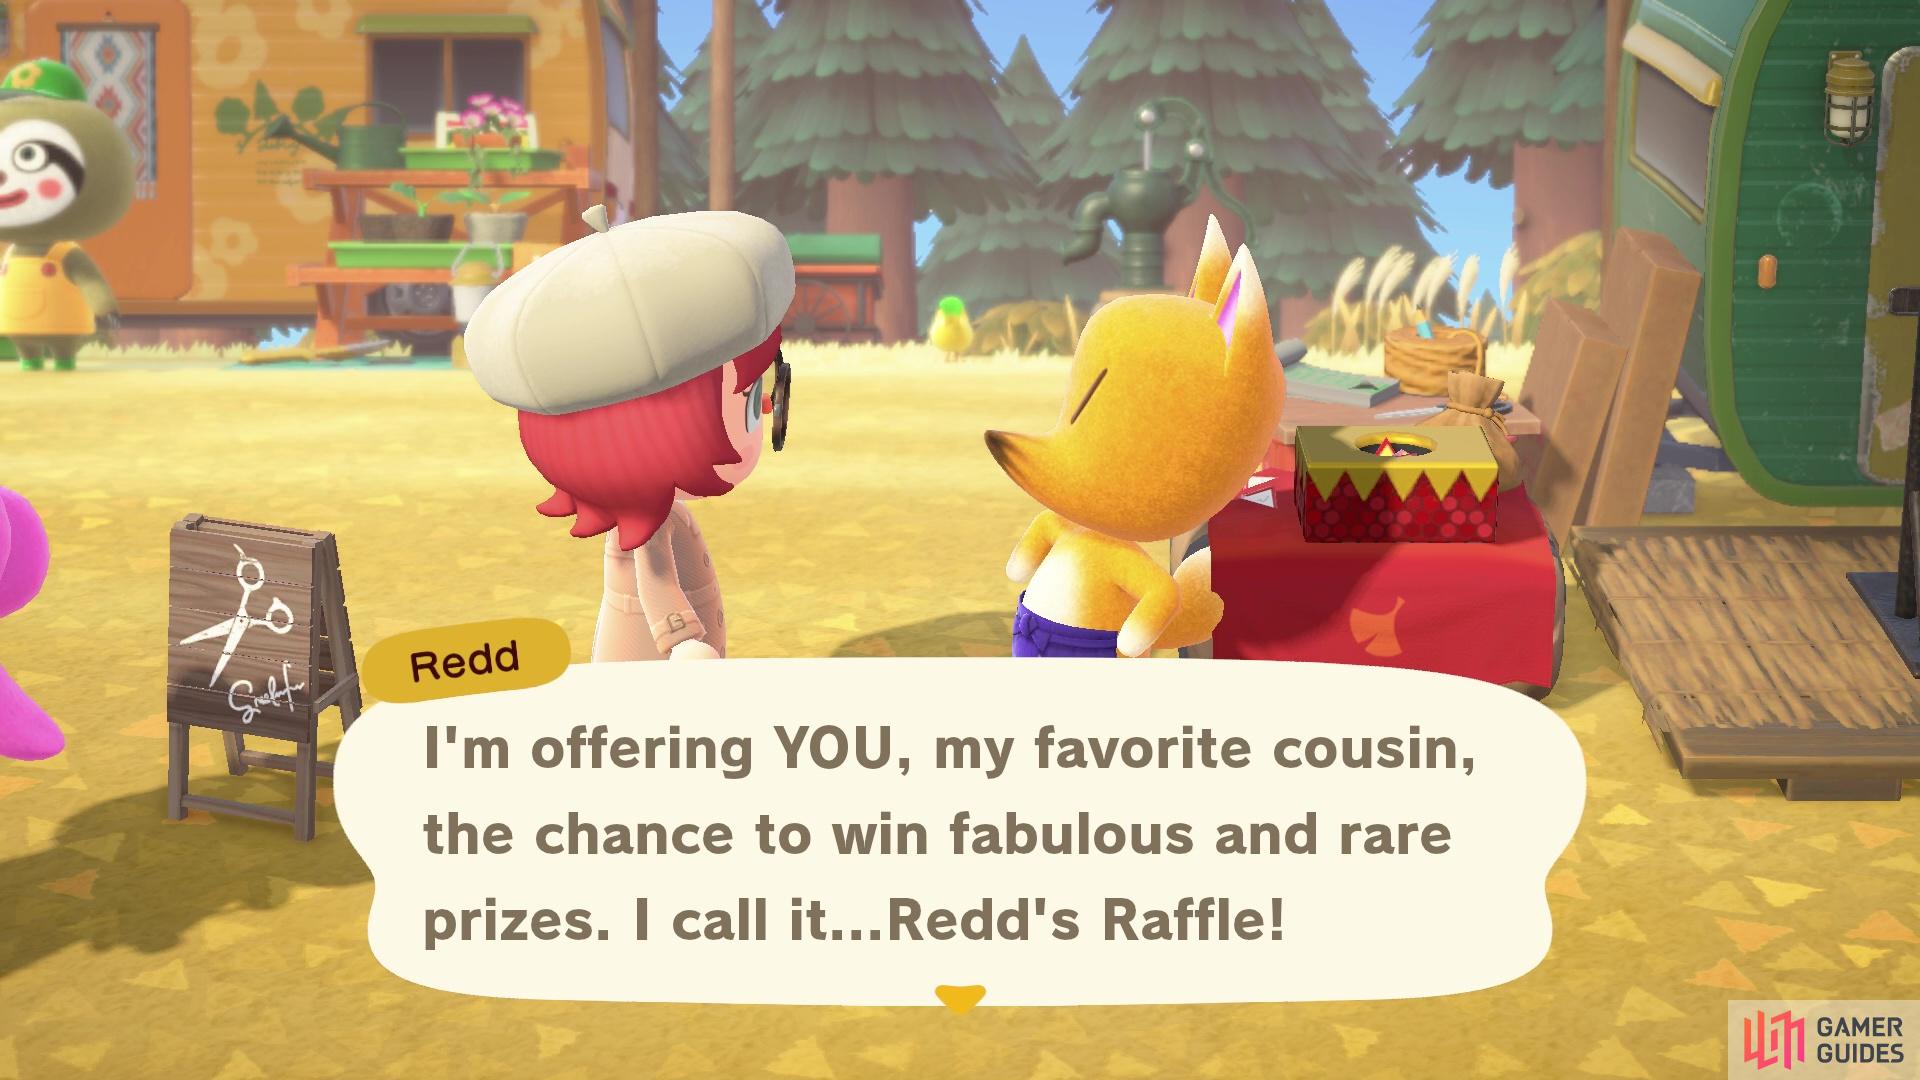 Redd will sell art and also host a raffle…totally legit.